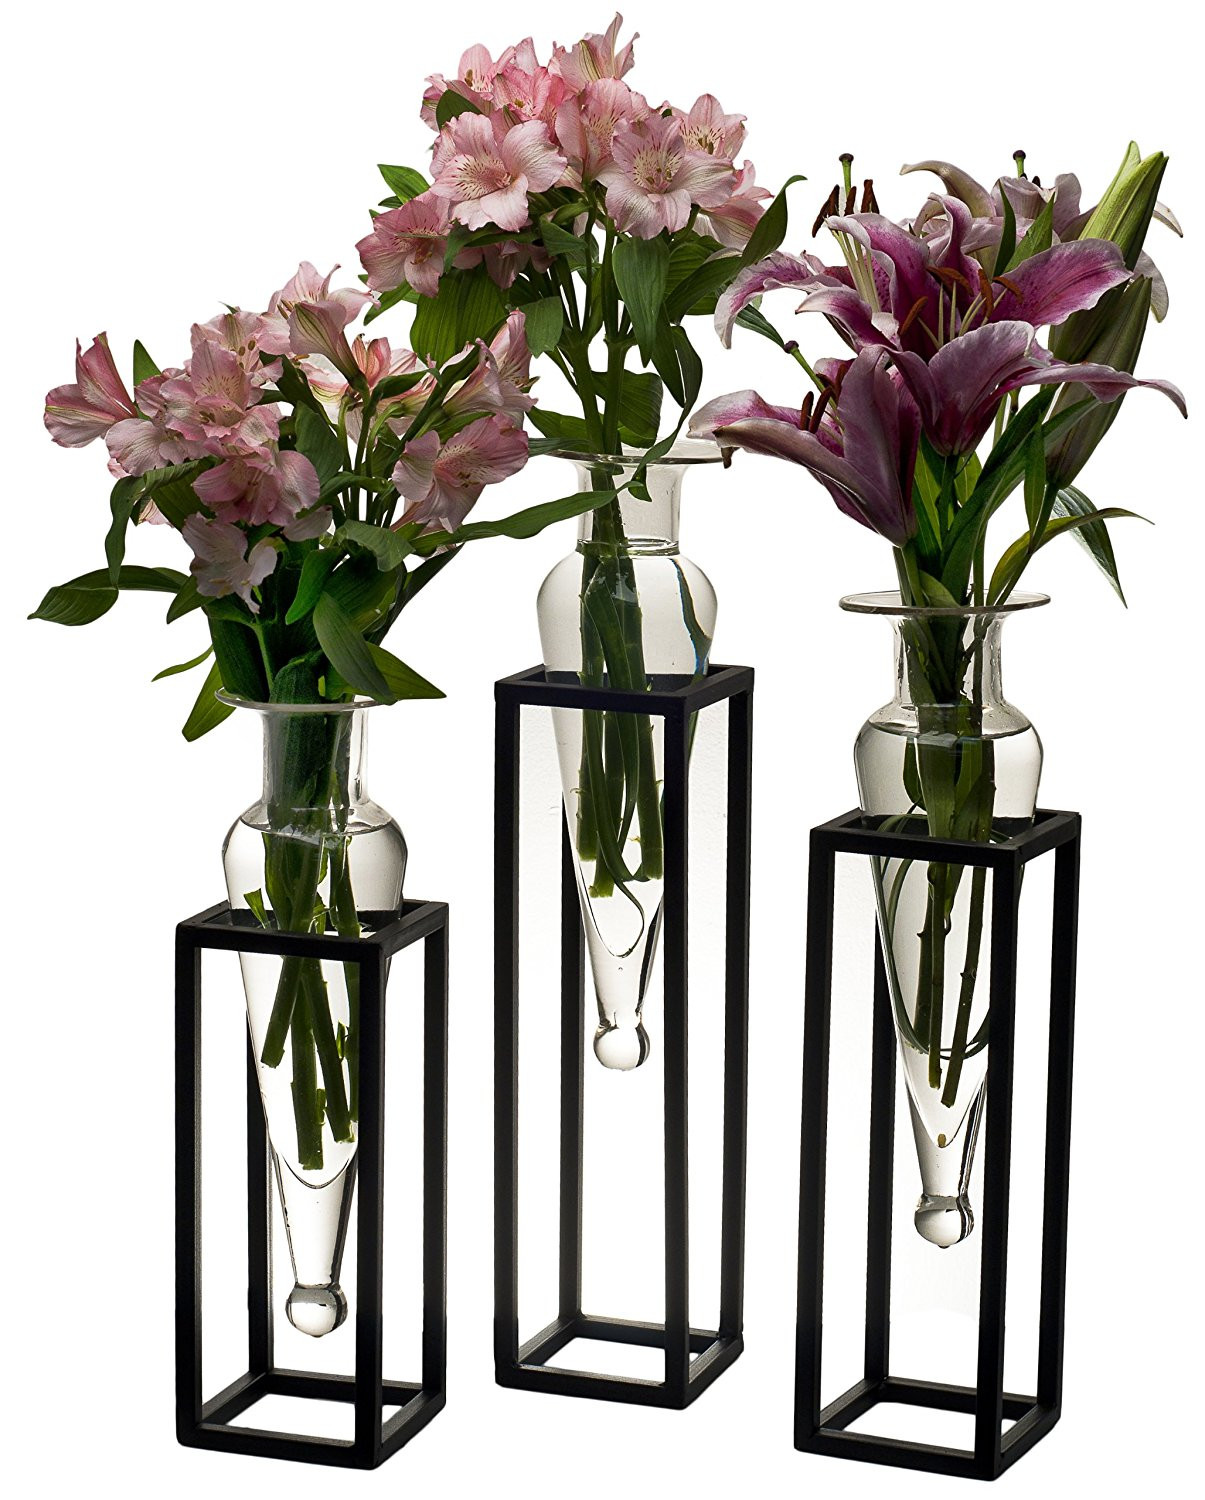 27 Lovable Galvanized Metal Vases wholesale 2024 free download galvanized metal vases wholesale of cheap metal square tubing find metal square tubing deals on line at for set of 3 clear amphorae vases on square tubing metal stands